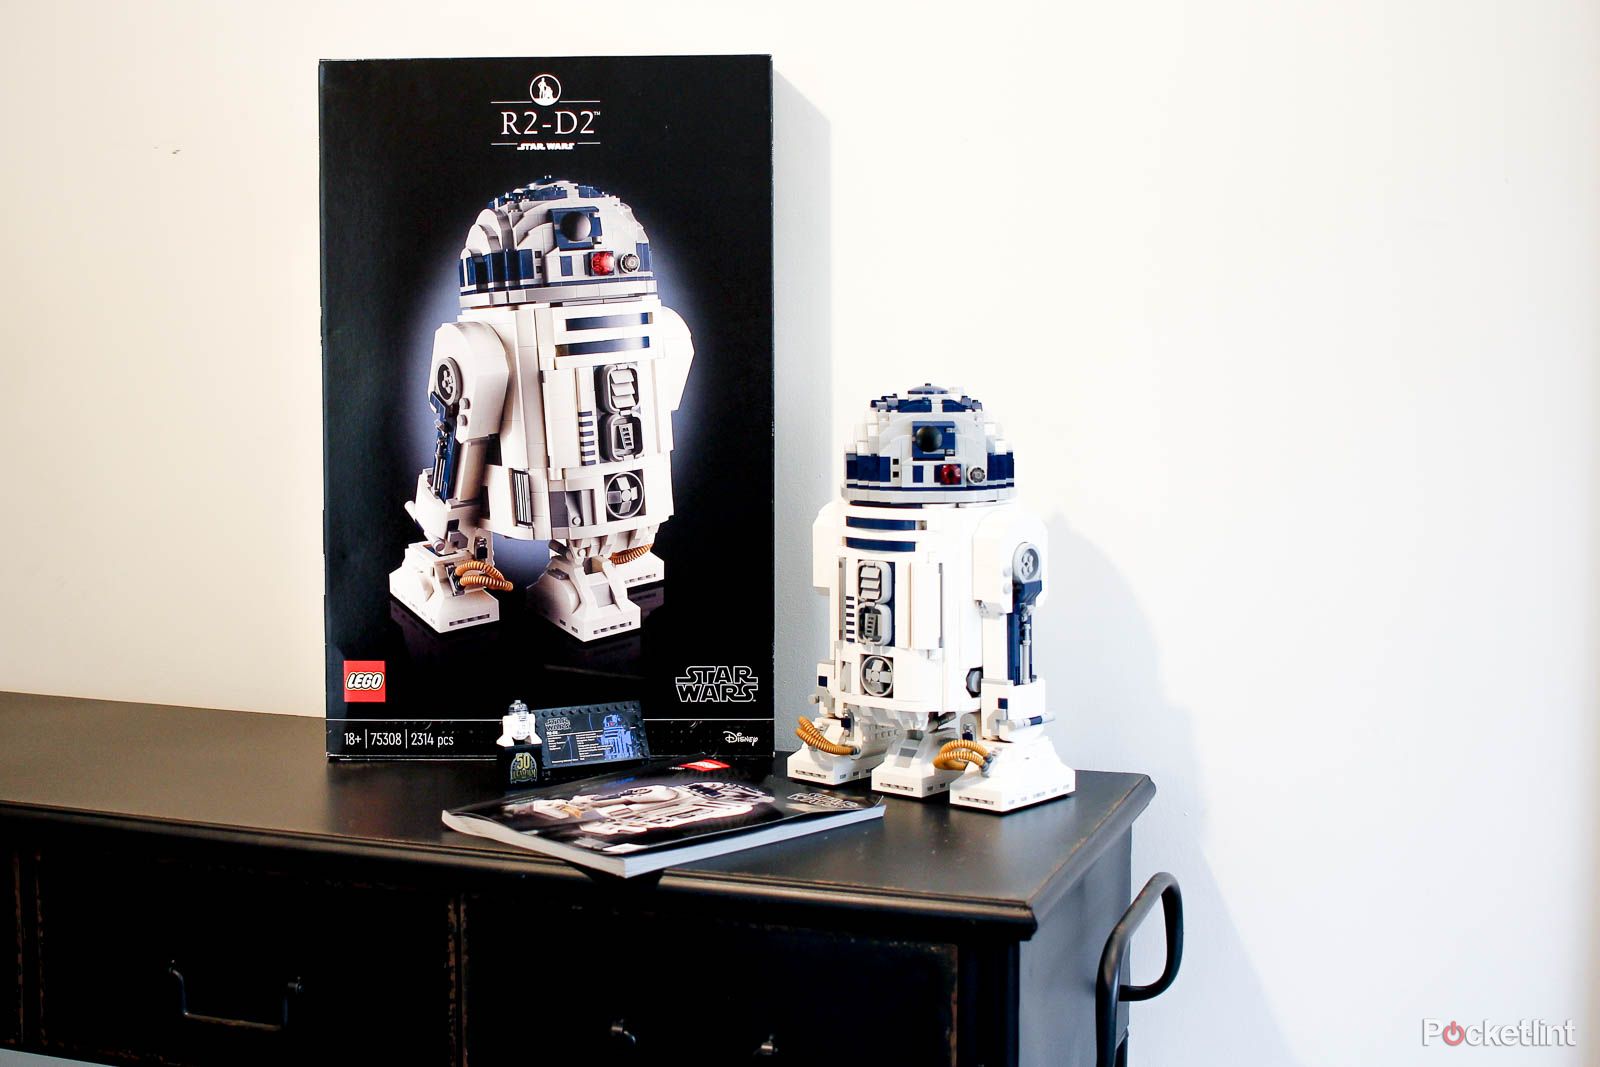 Lego R2-D2 hands on build pictures photo 6